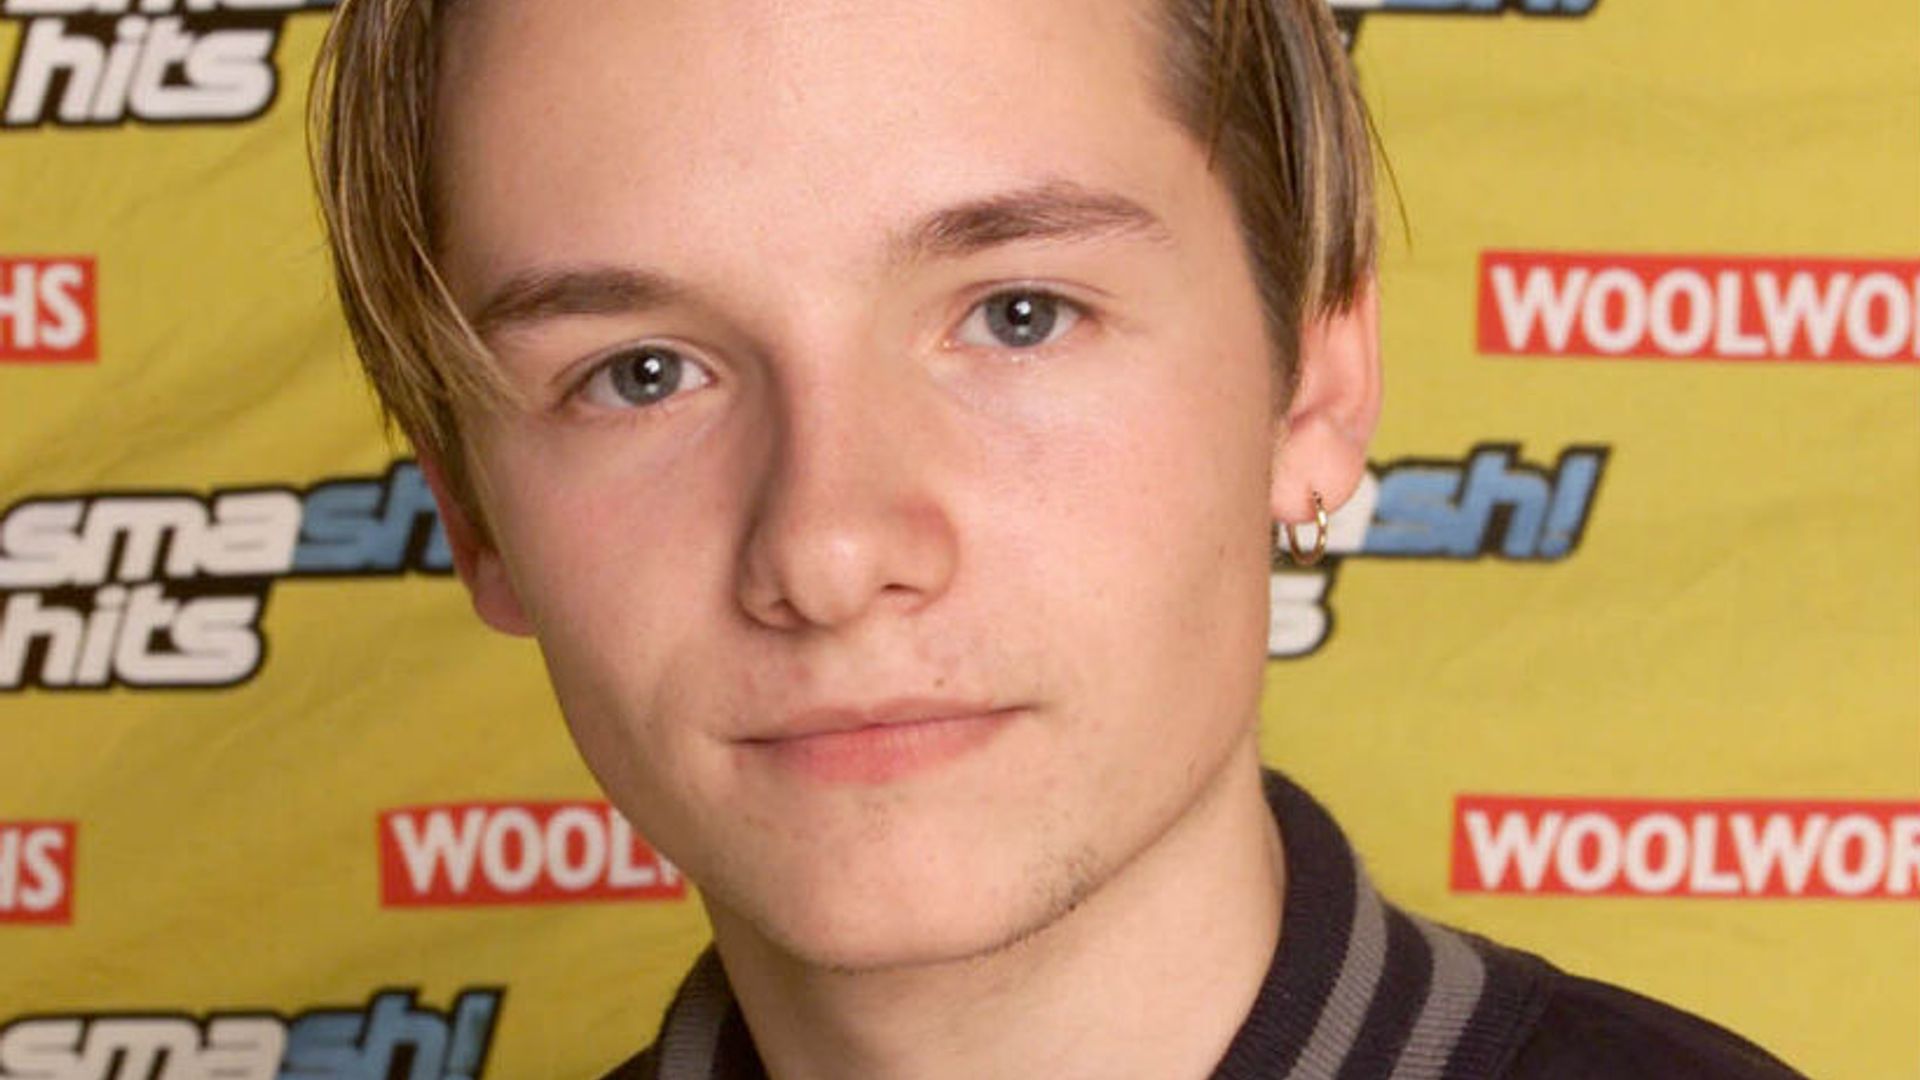 Jack Ryder looks totally different from his EastEnders days in new photo